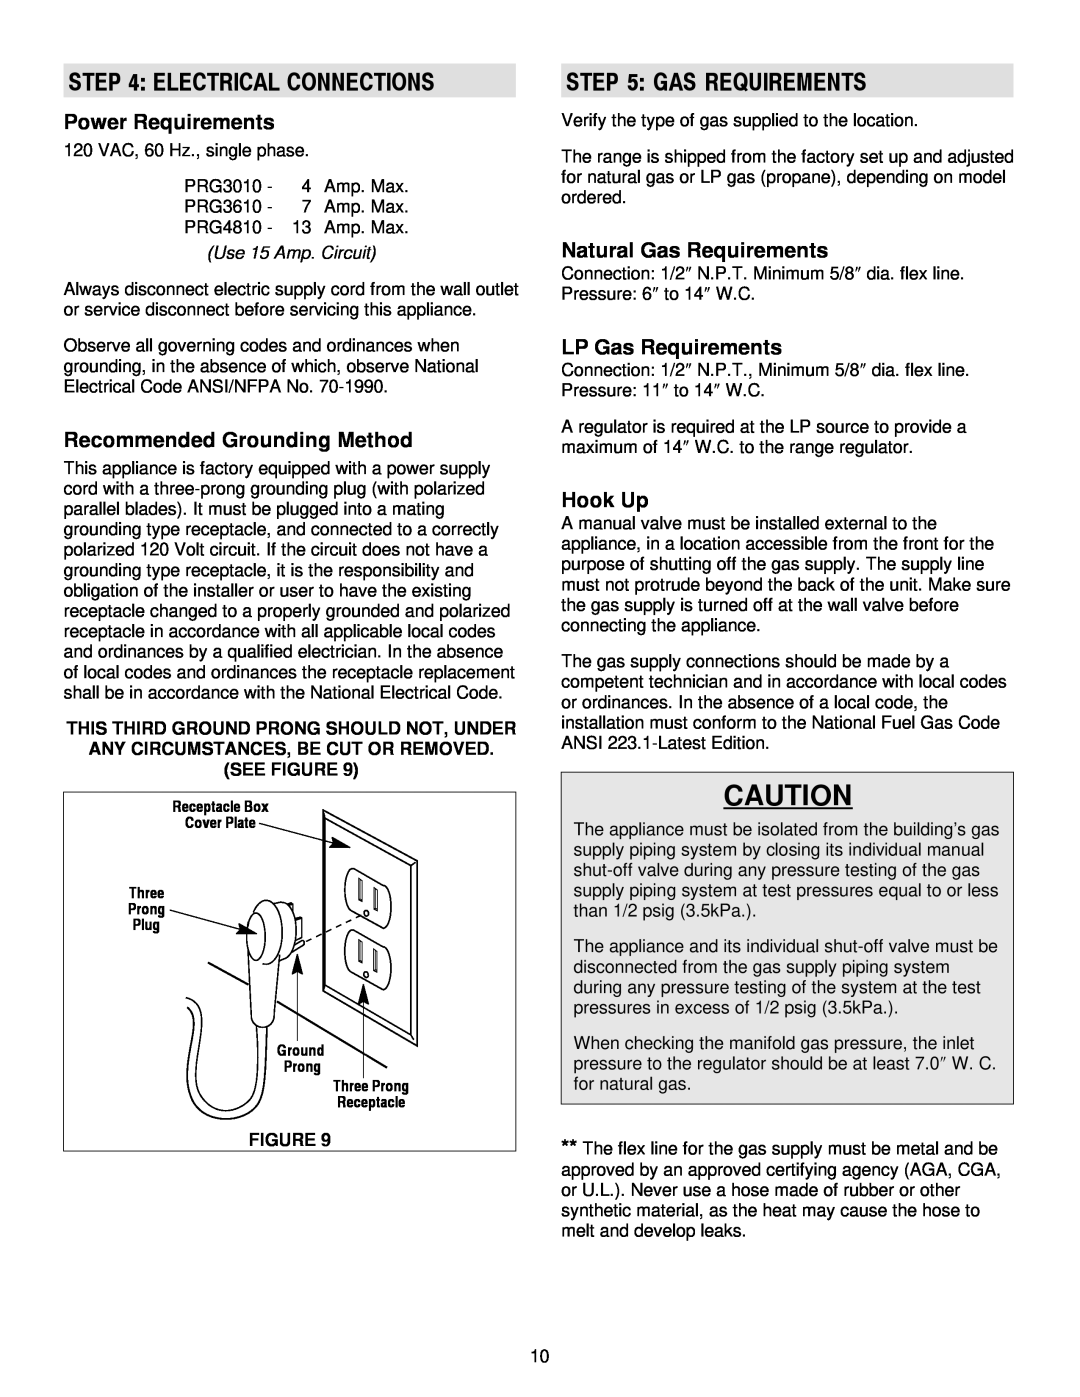 Jenn-Air 36 Electrical Connections, Gas Requirements, Power Requirements, Recommended Grounding Method, Hook Up, Figure 